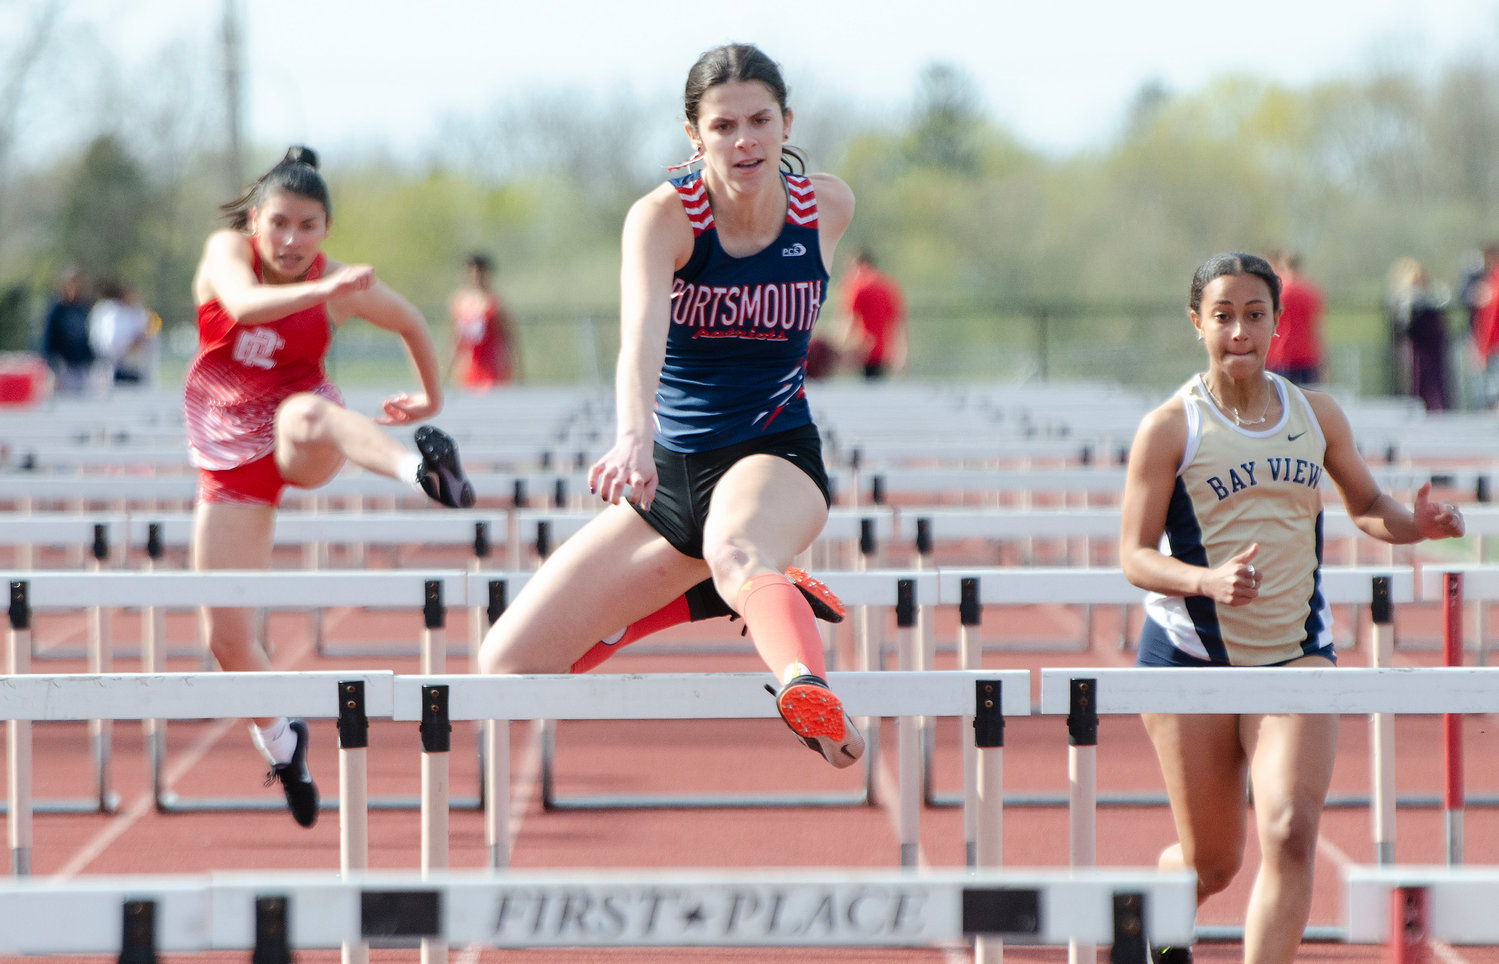 Katie Spaner skims over a hurdle during the 110-meter hurdles.